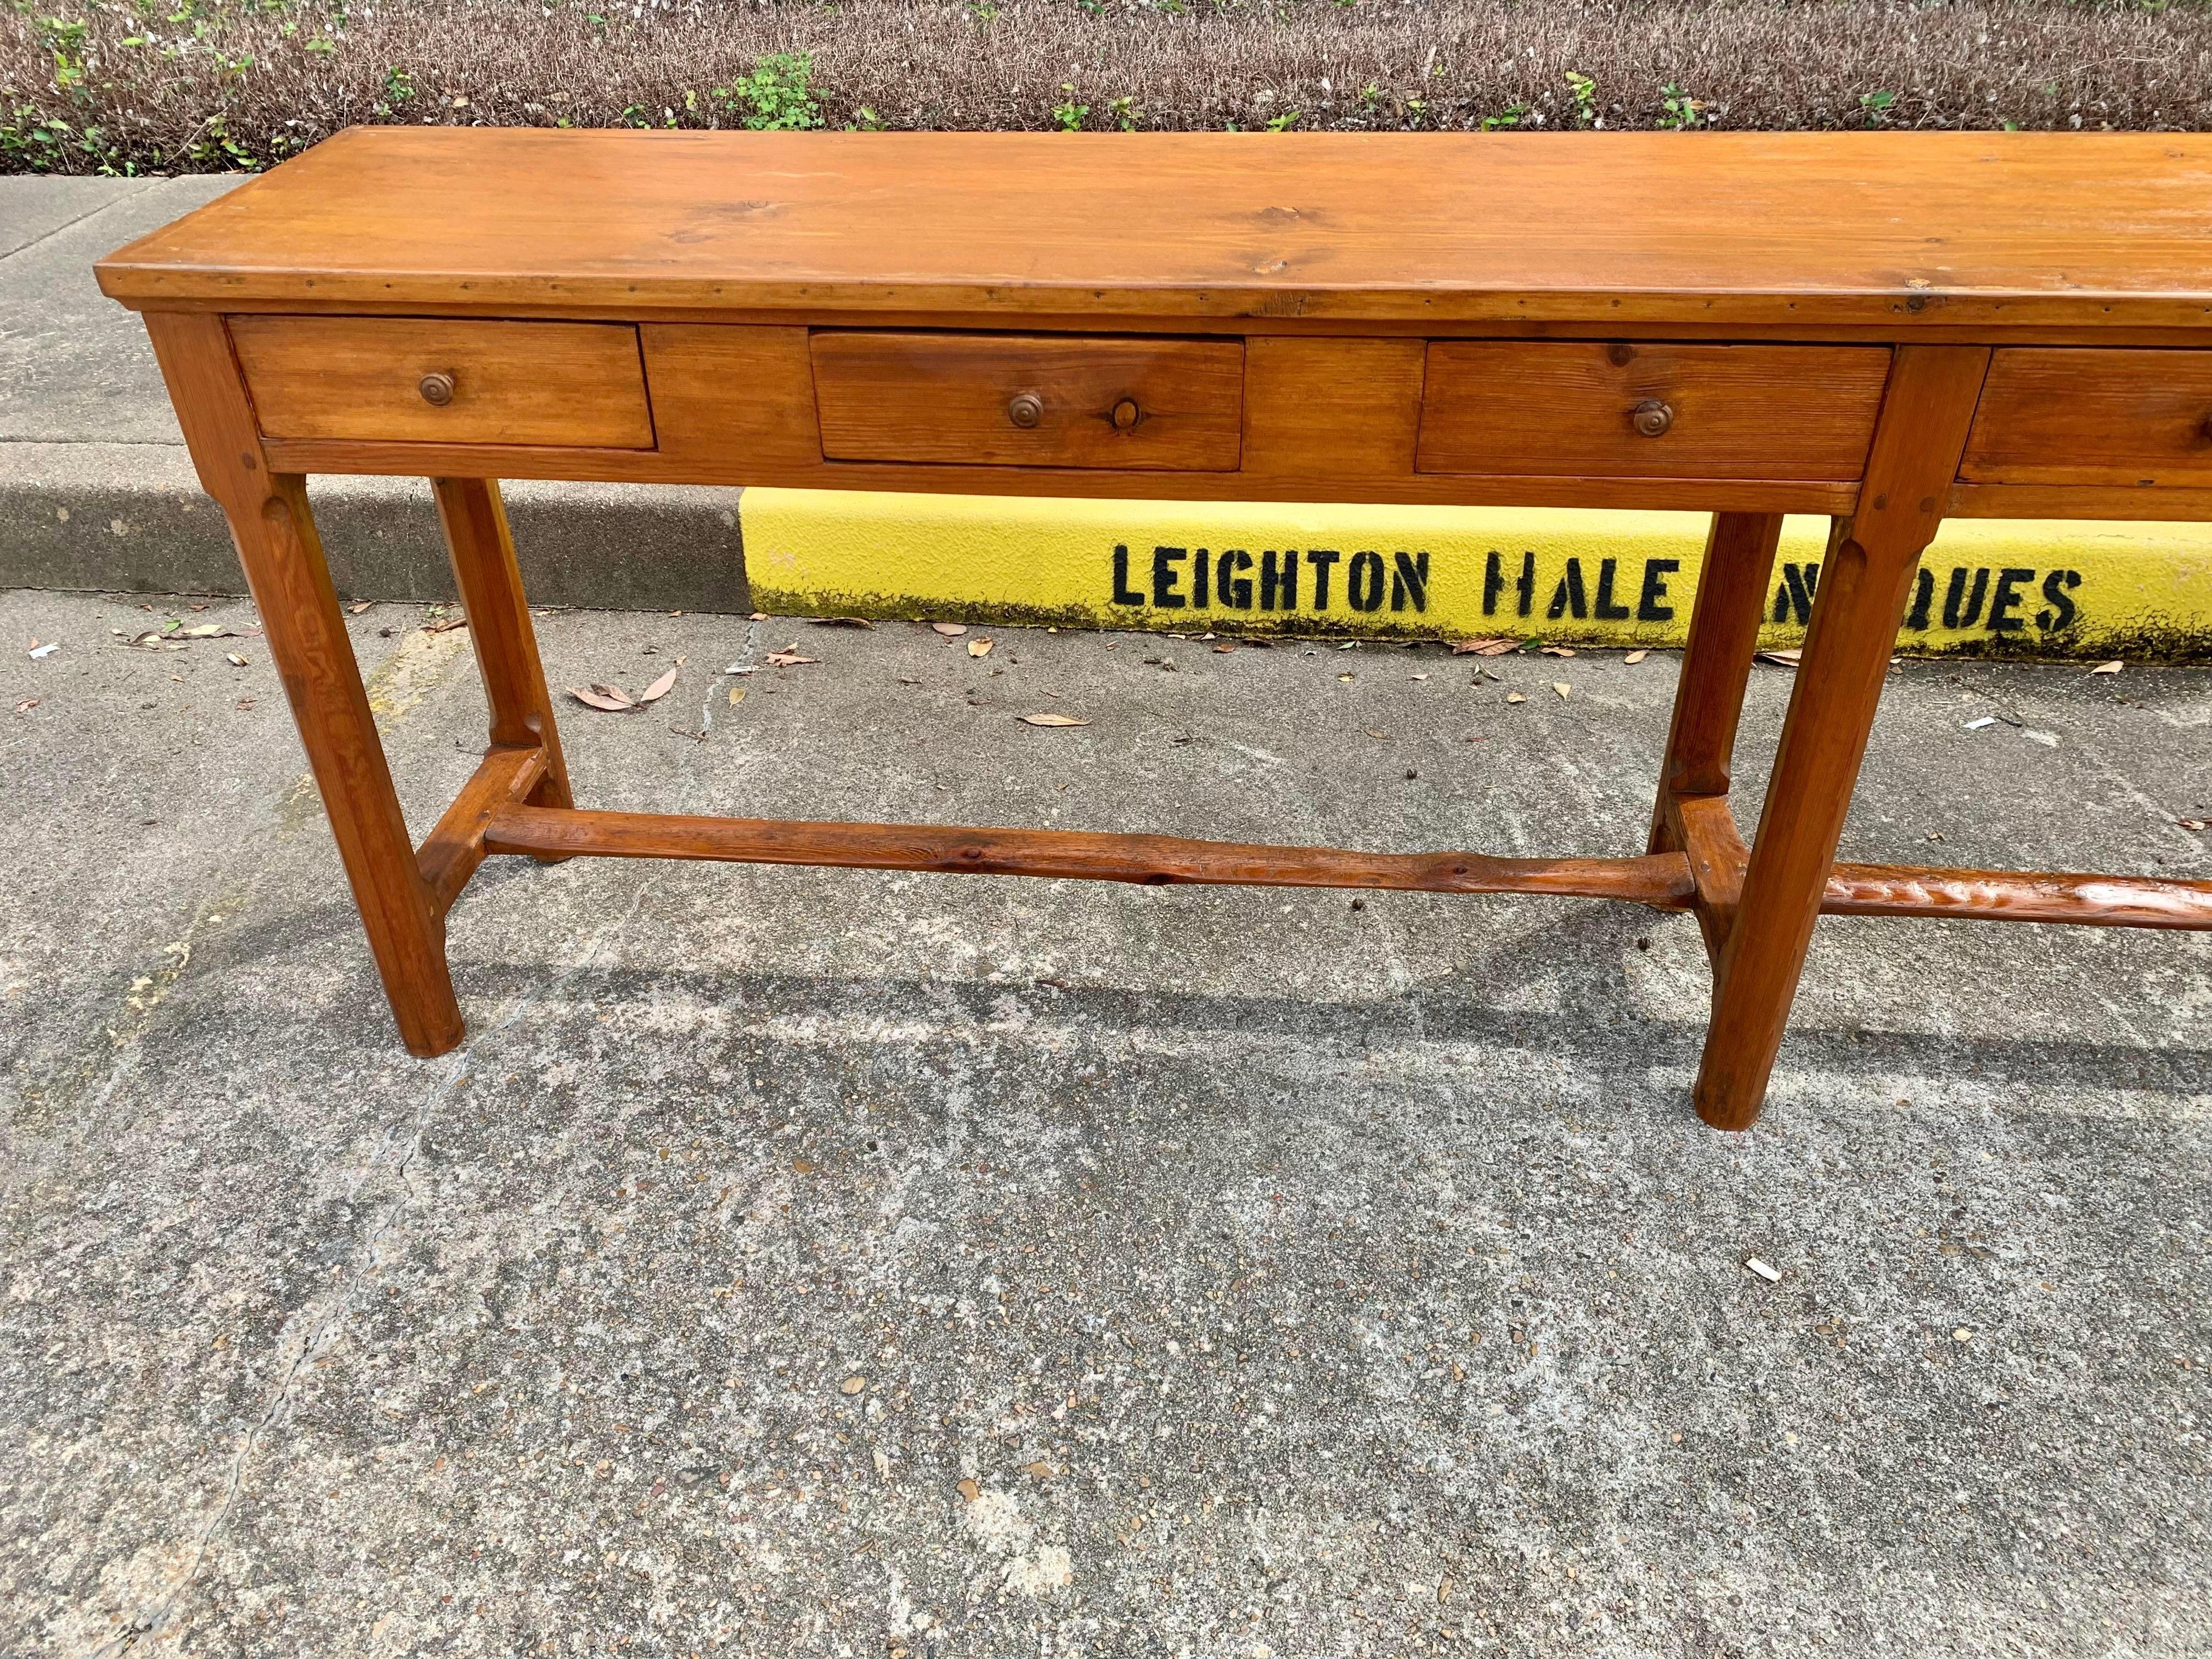 Hand-Crafted 19th Century French Pine Console Table